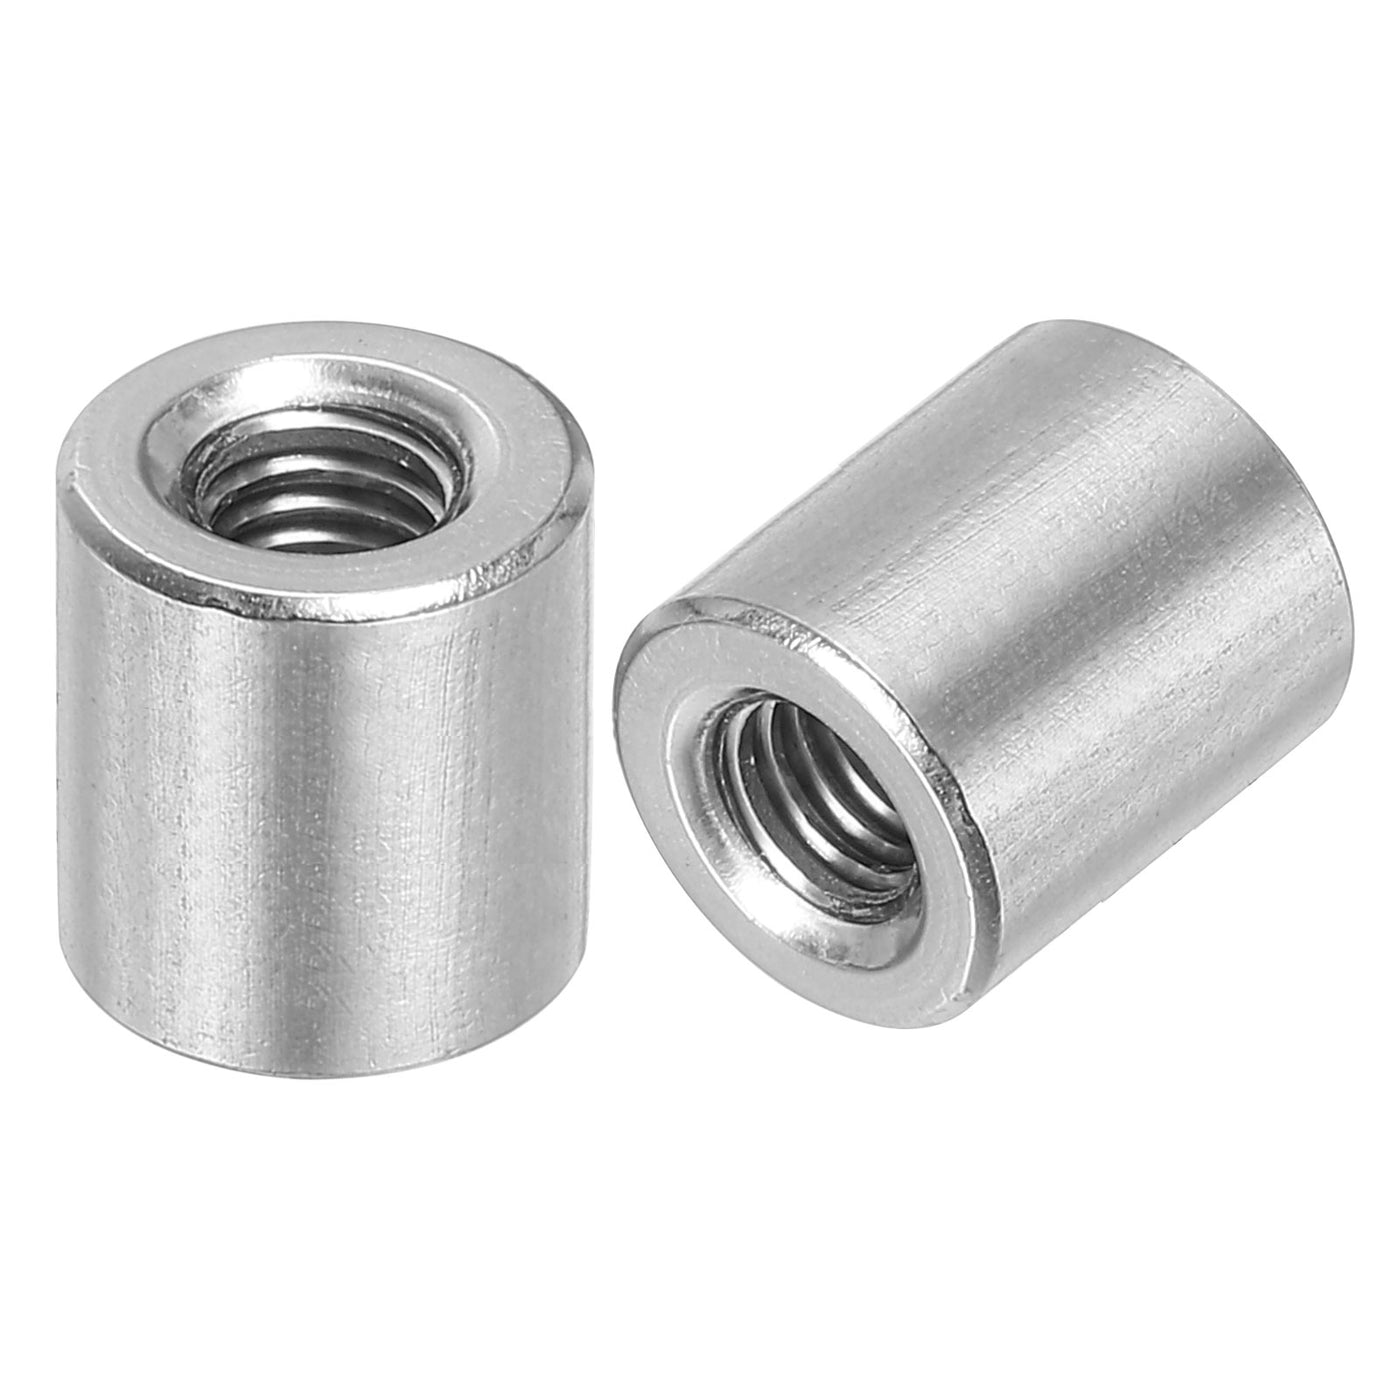 uxcell Uxcell 10Pcs Round Connector Nuts, M6x12x10mm Coupling Nut Sleeve Rod Bar Stud Nut